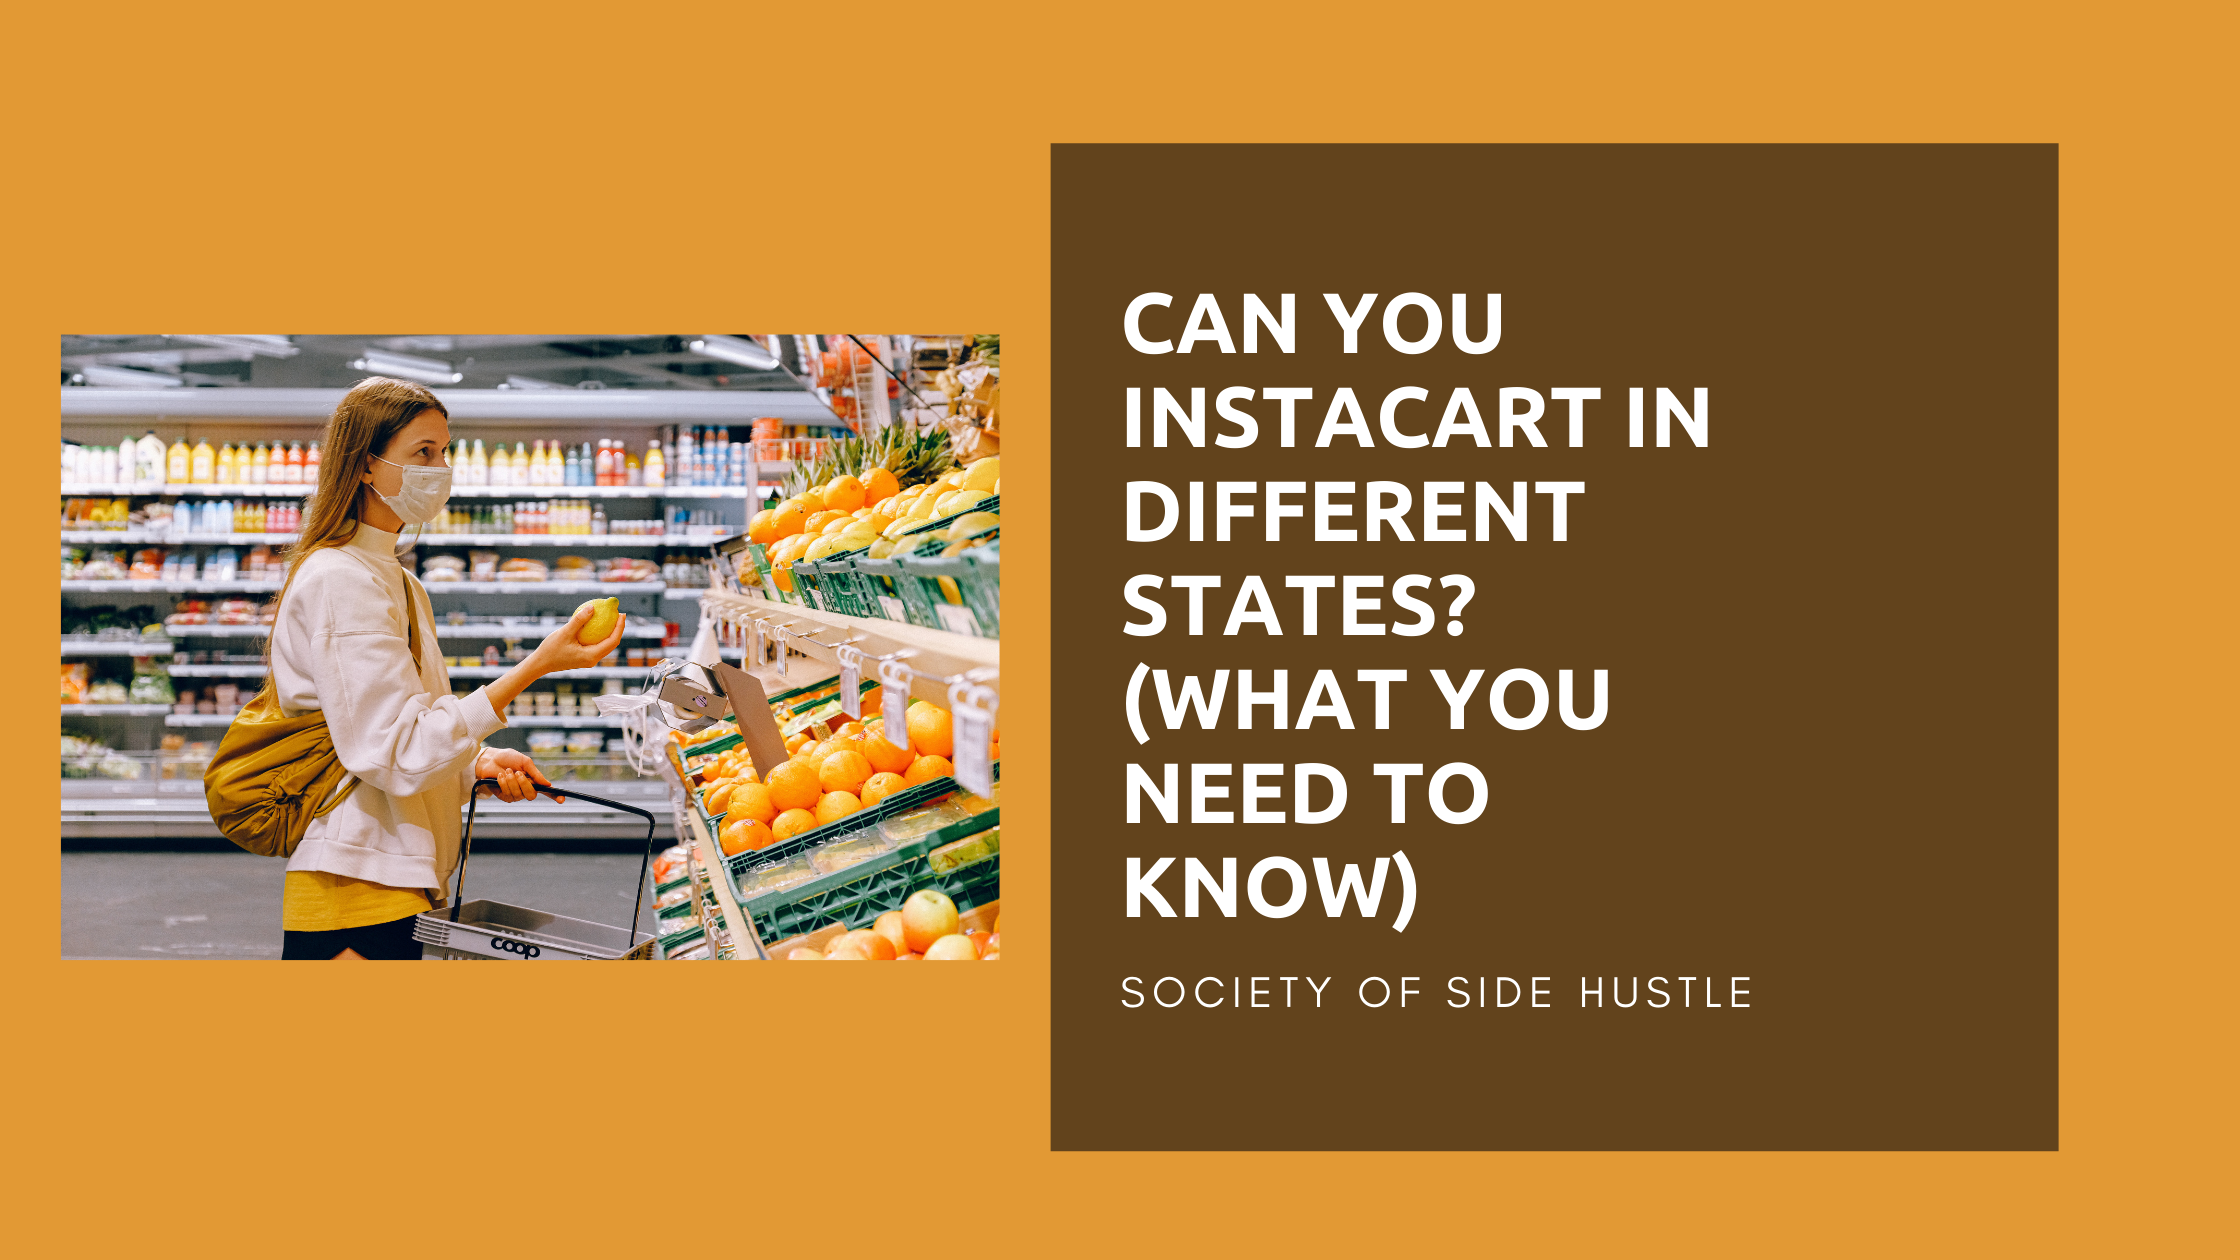 Can You Instacart in Different States? (What You Need To Know)